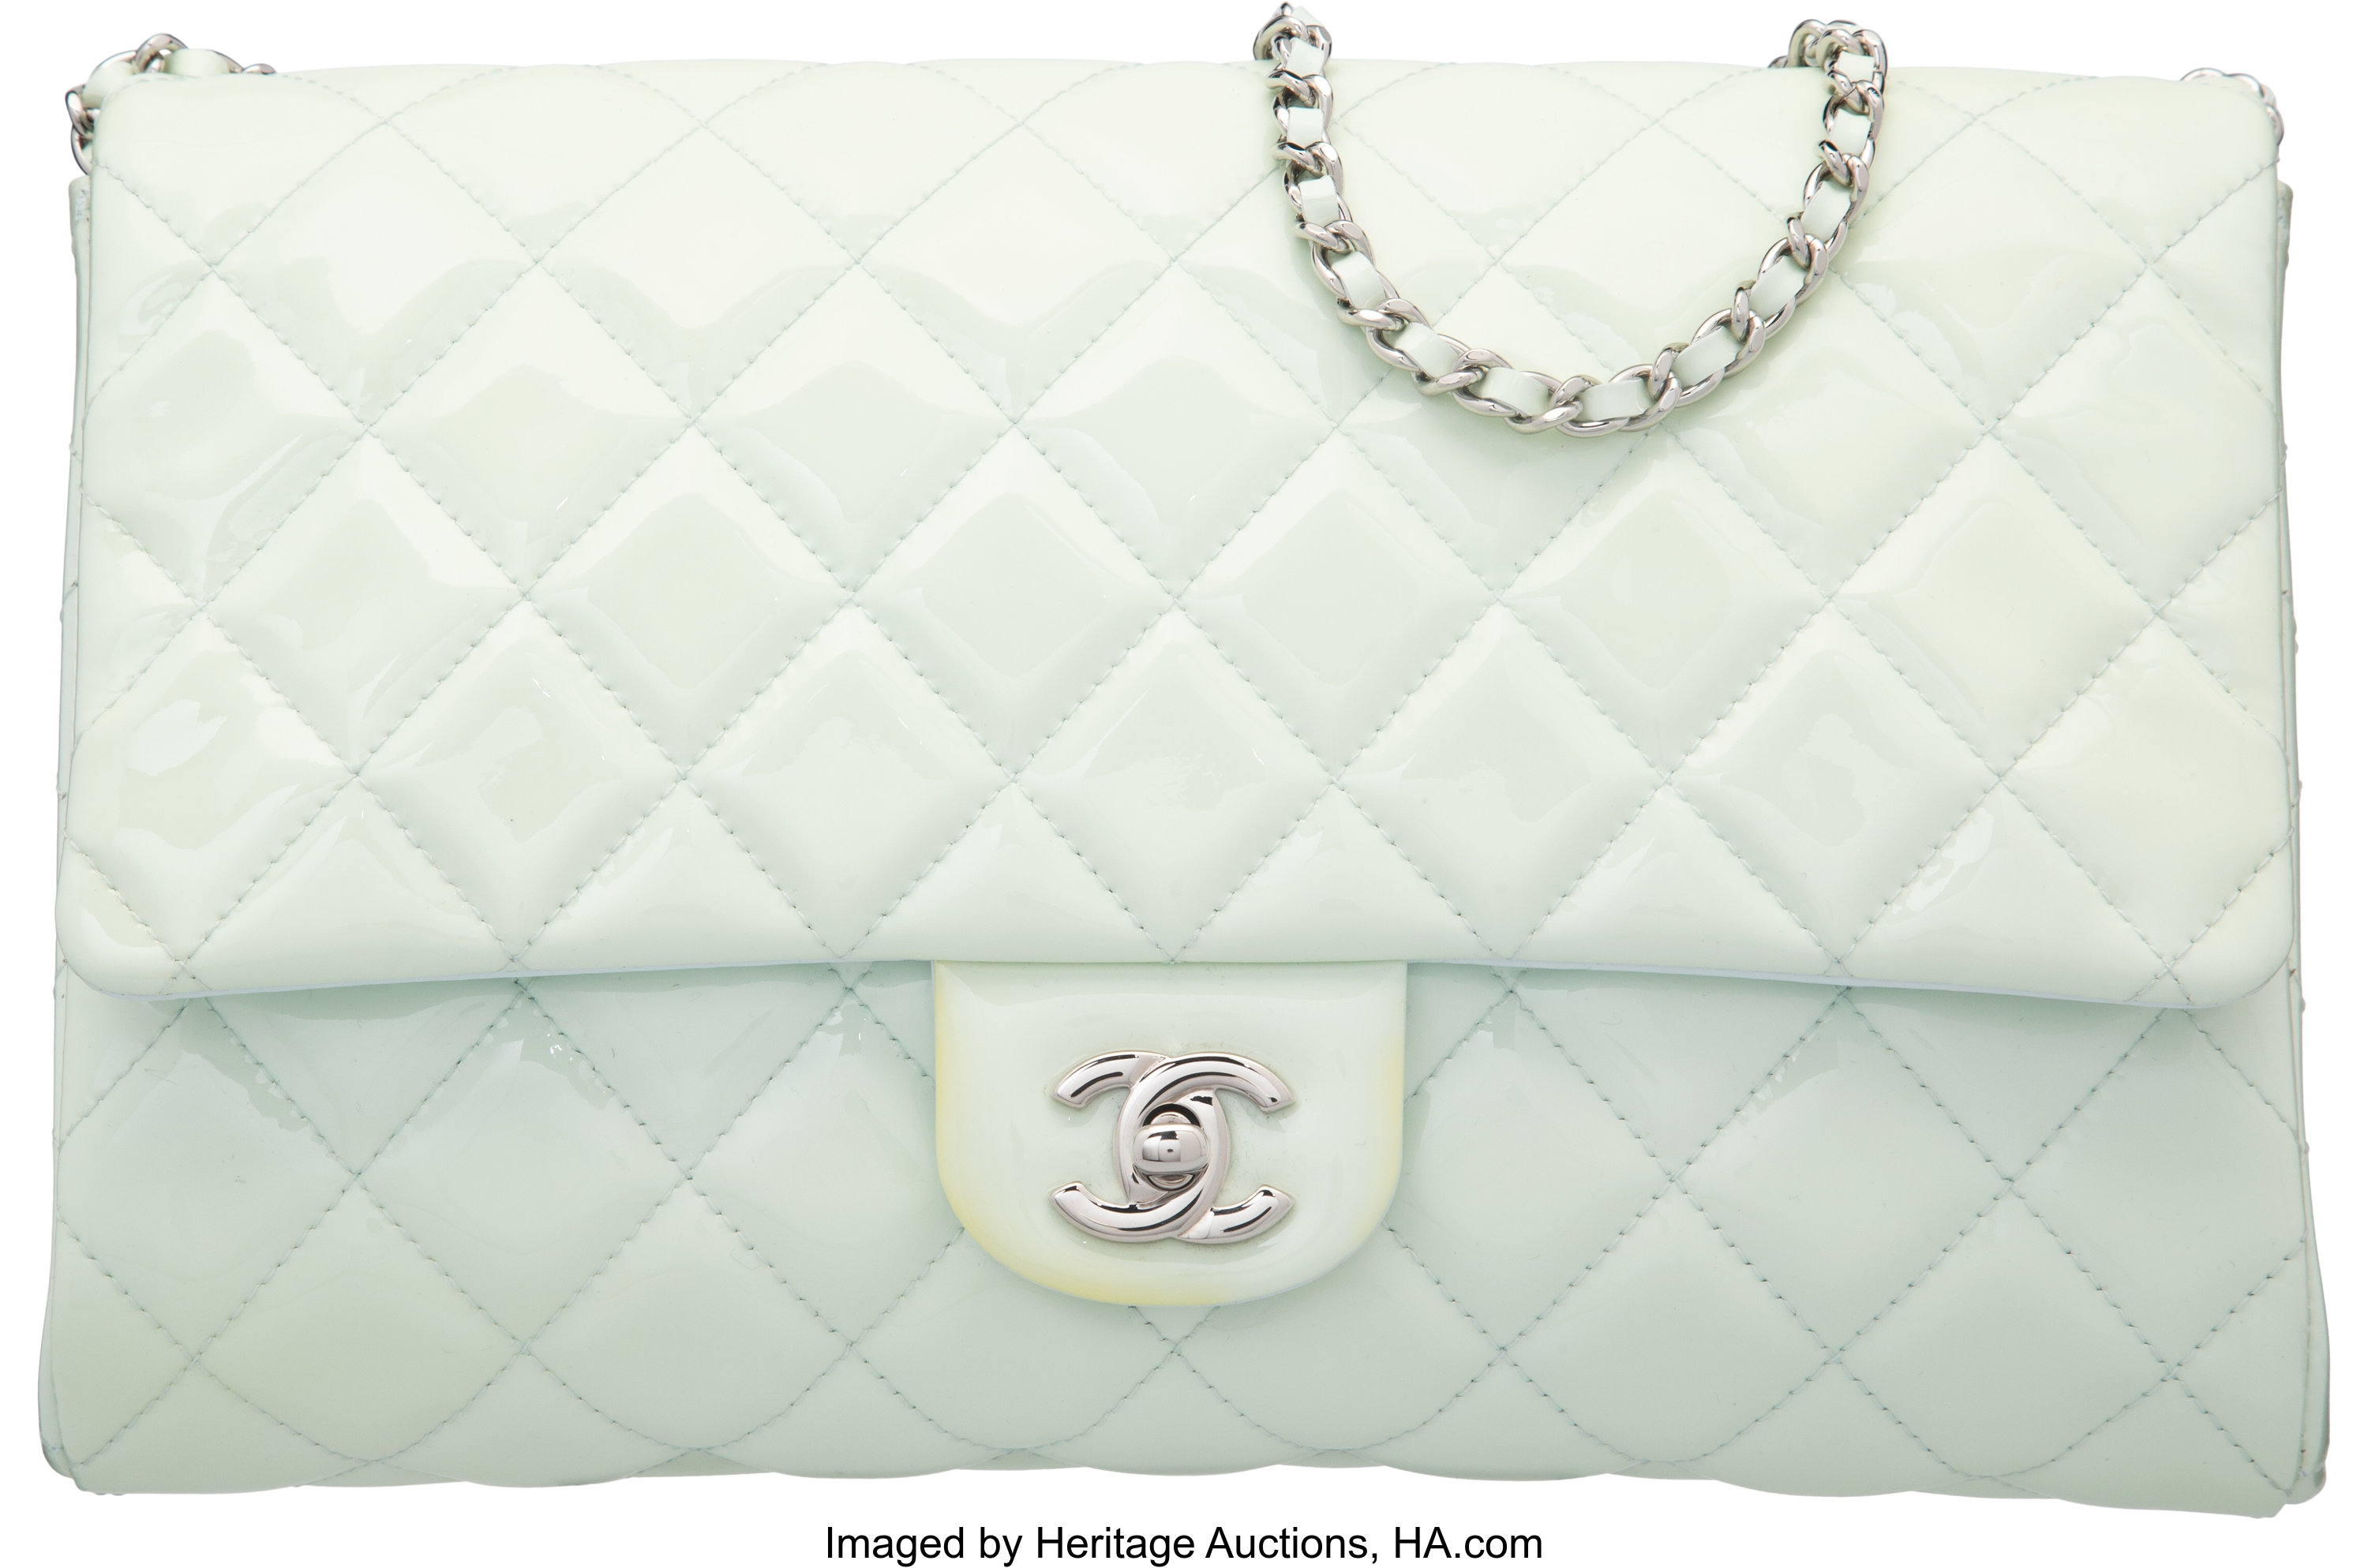 CHANEL Paris Couture CC 1990's Green Quilted Satin Tassel Egg Clutch Bag